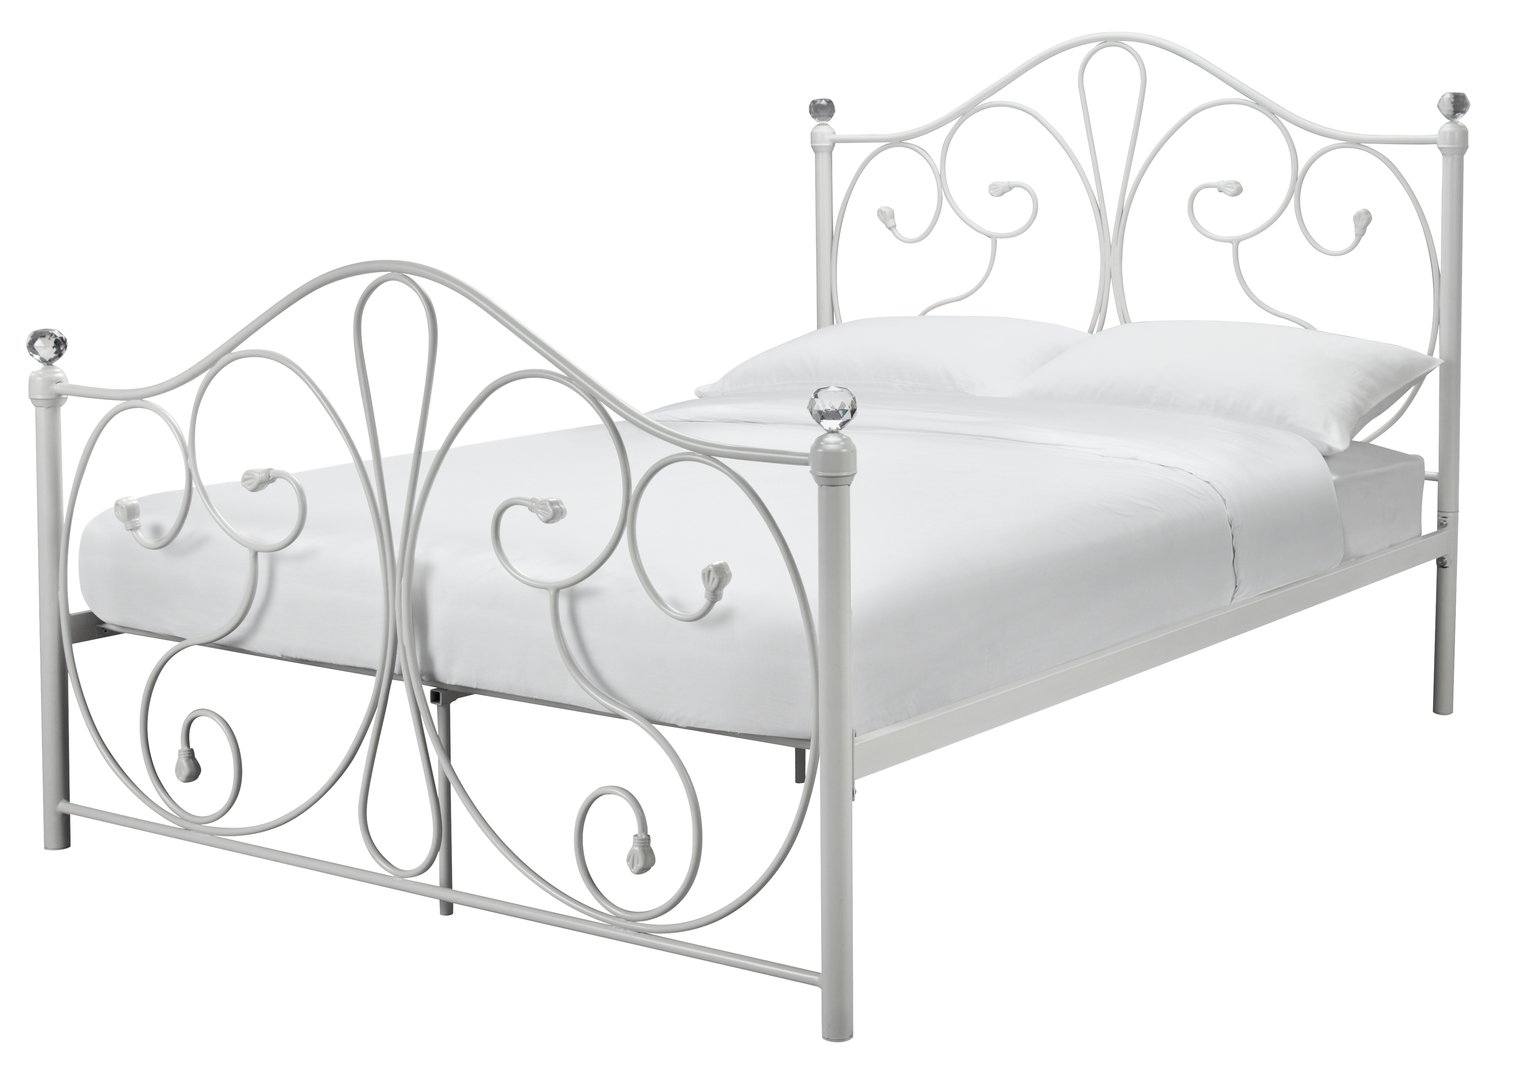 Laura 4ft6 Double Metal Swirl Design Bed Frame in Black or White